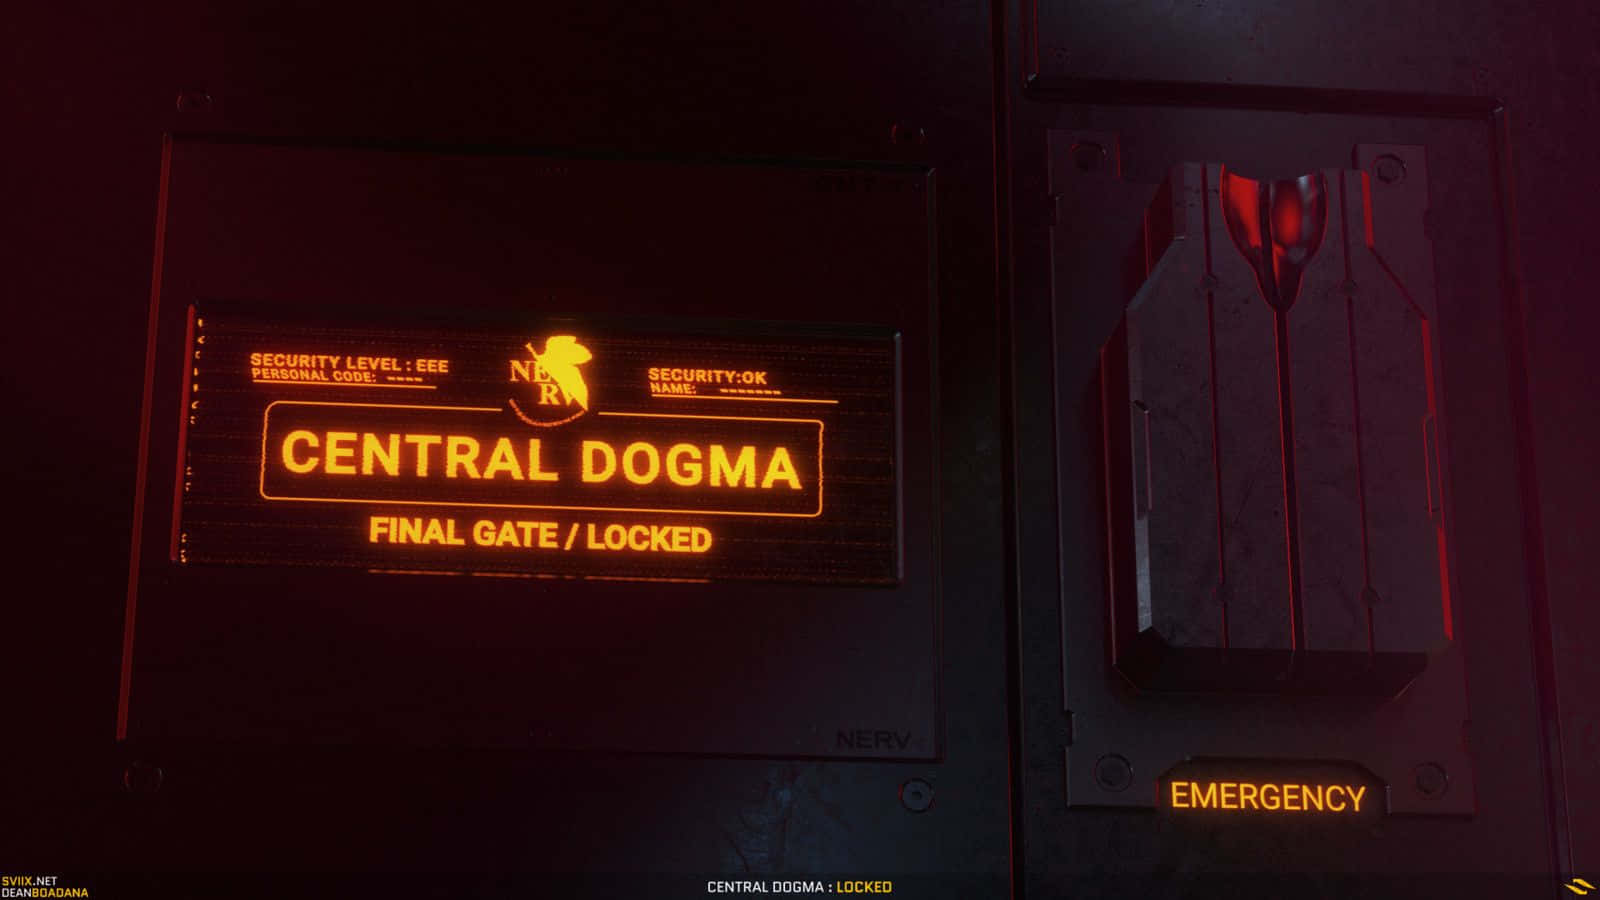 Dogmatic Gate Security Interface Wallpaper